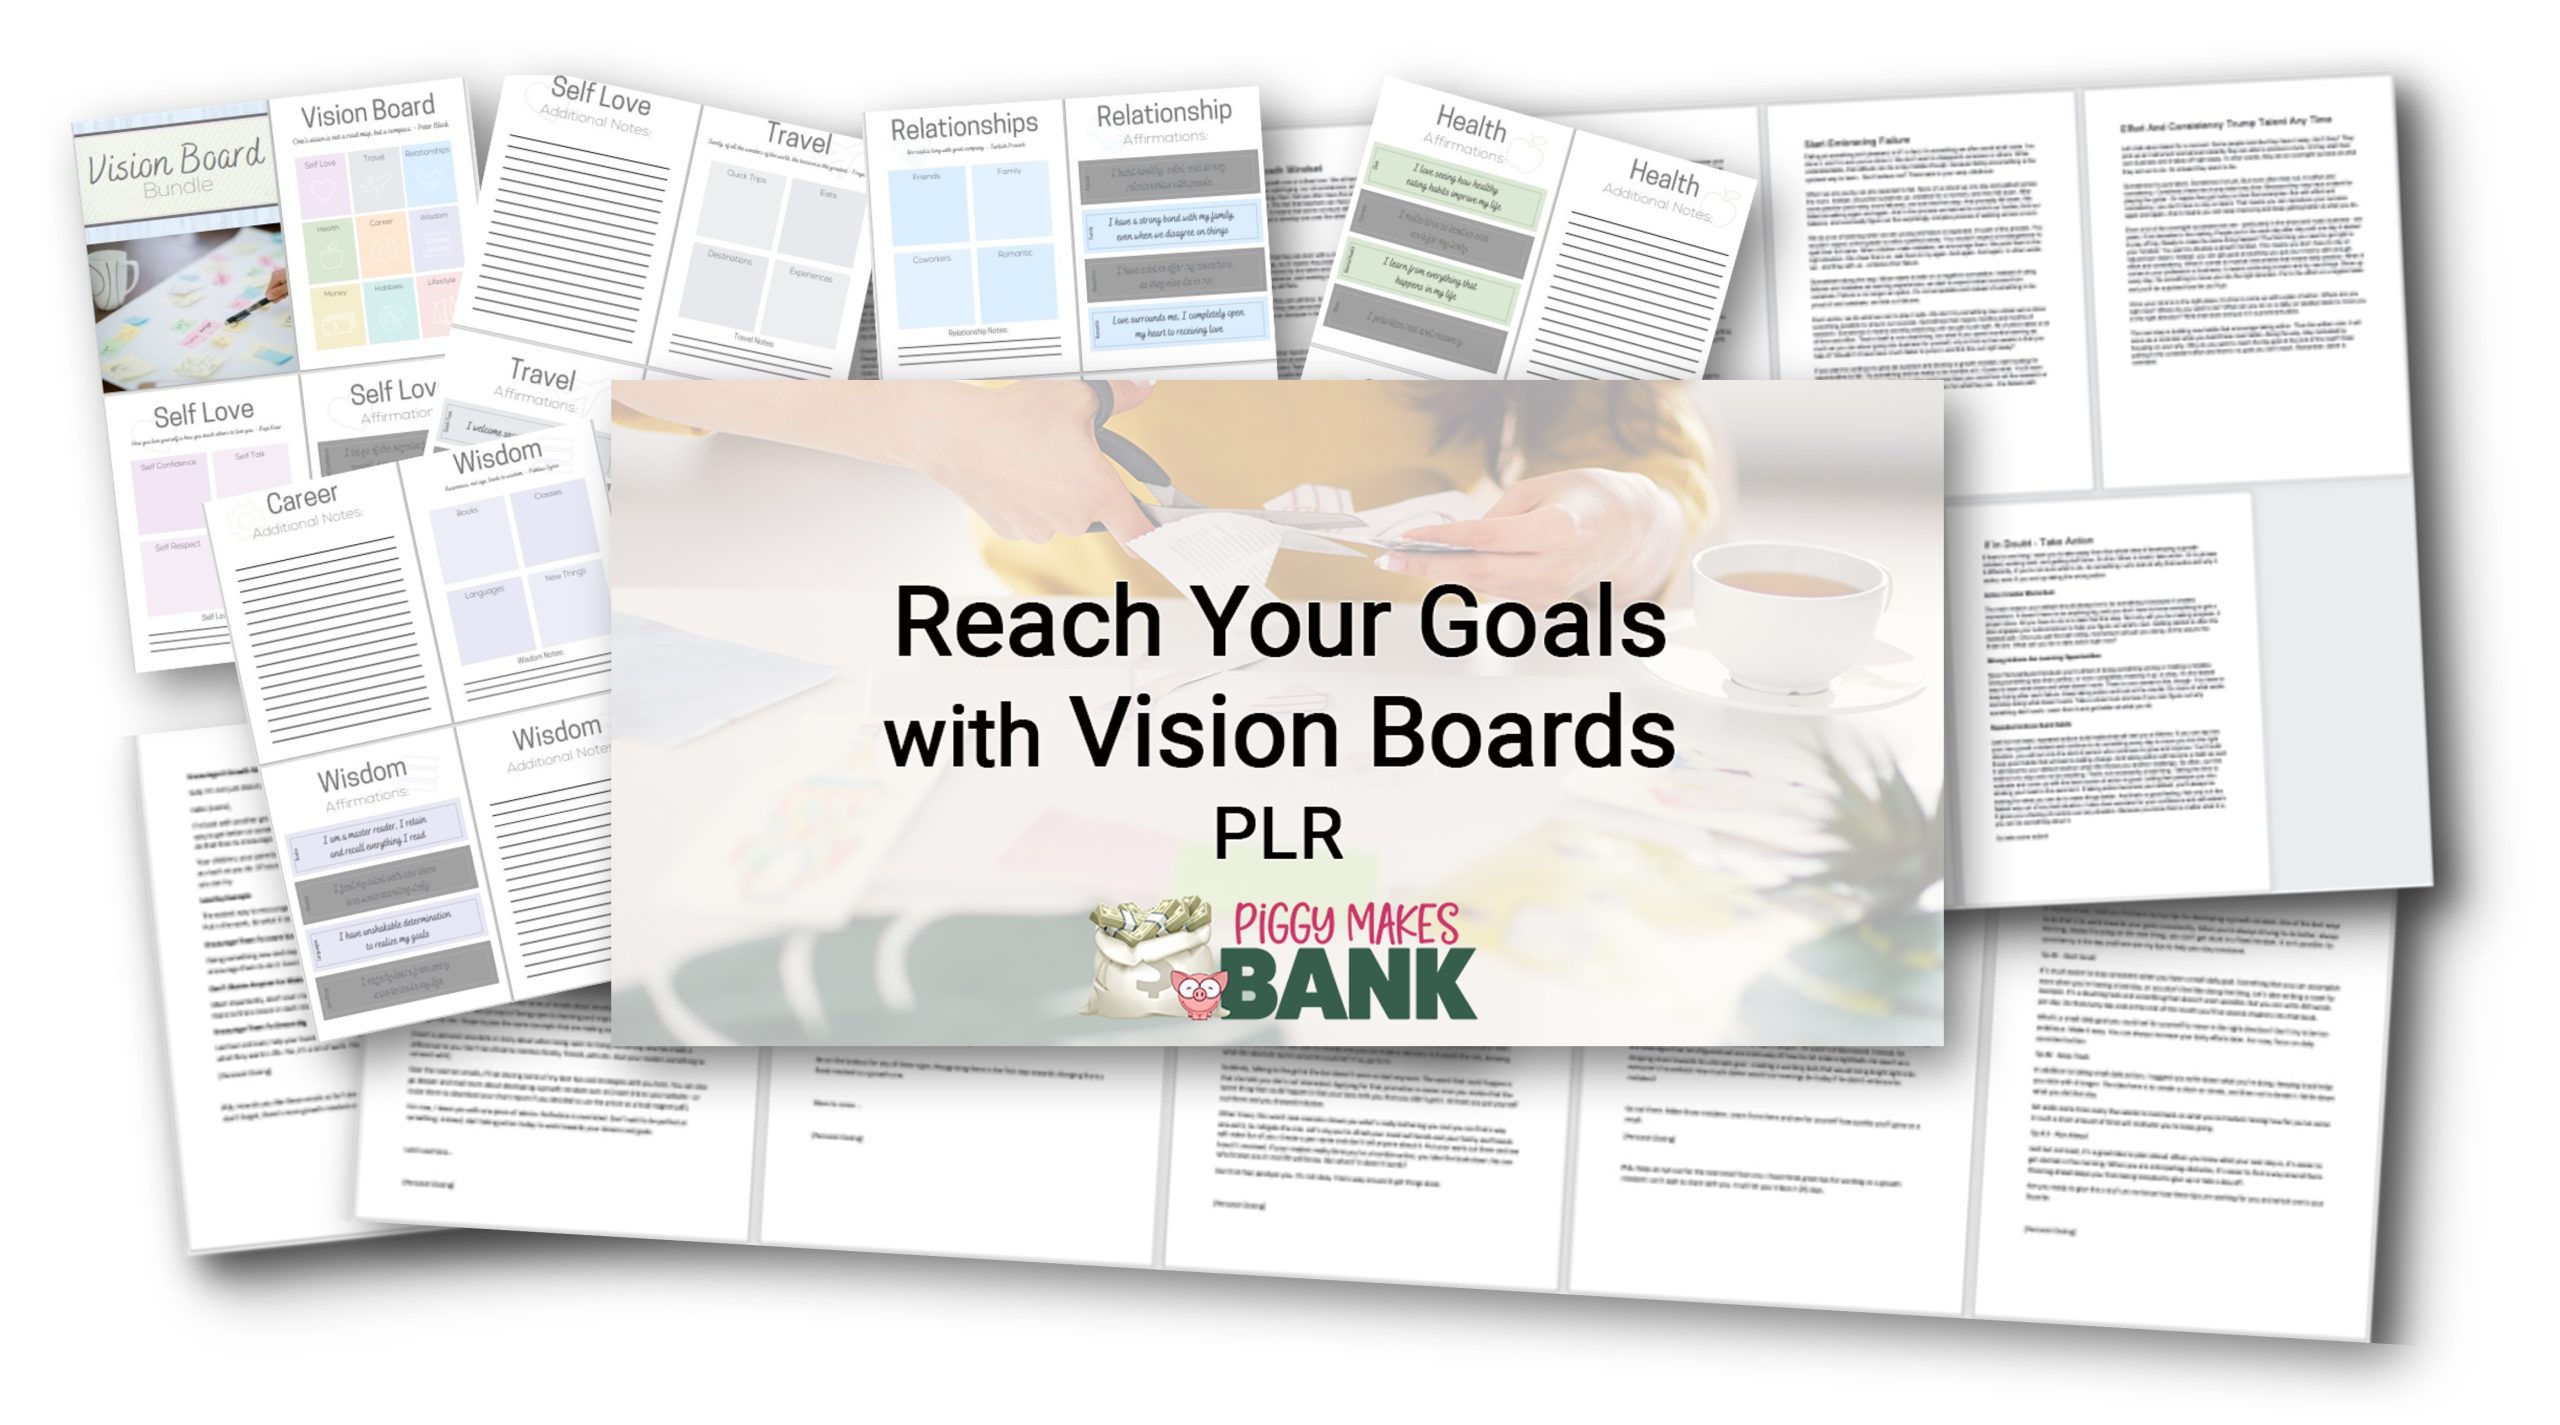 Reach Your Goals with a Vision Board PLR